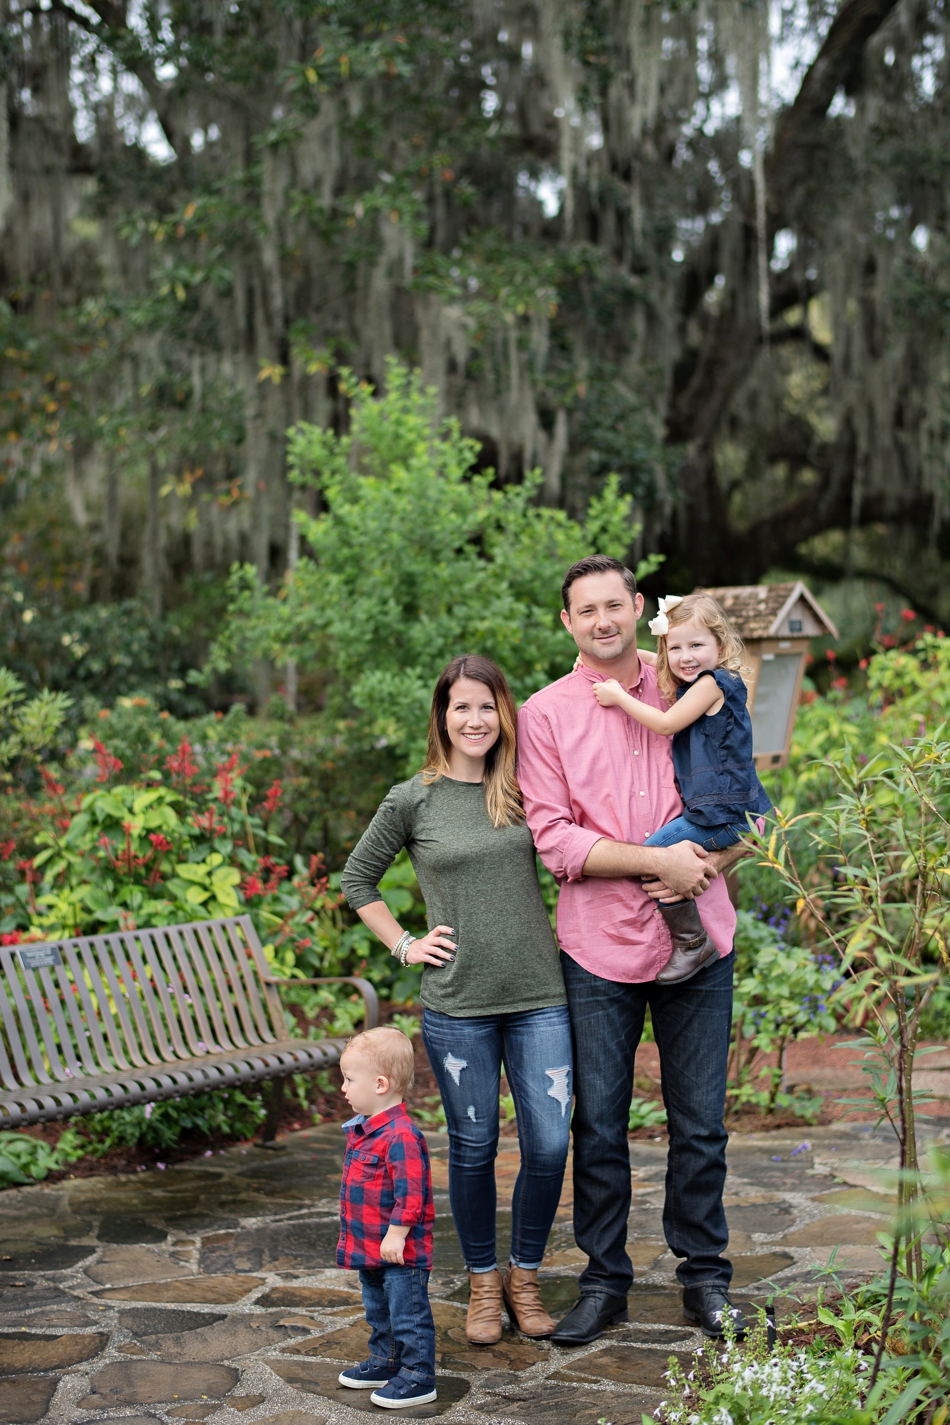 holiday family portrait session in orlando at Leu Gardens